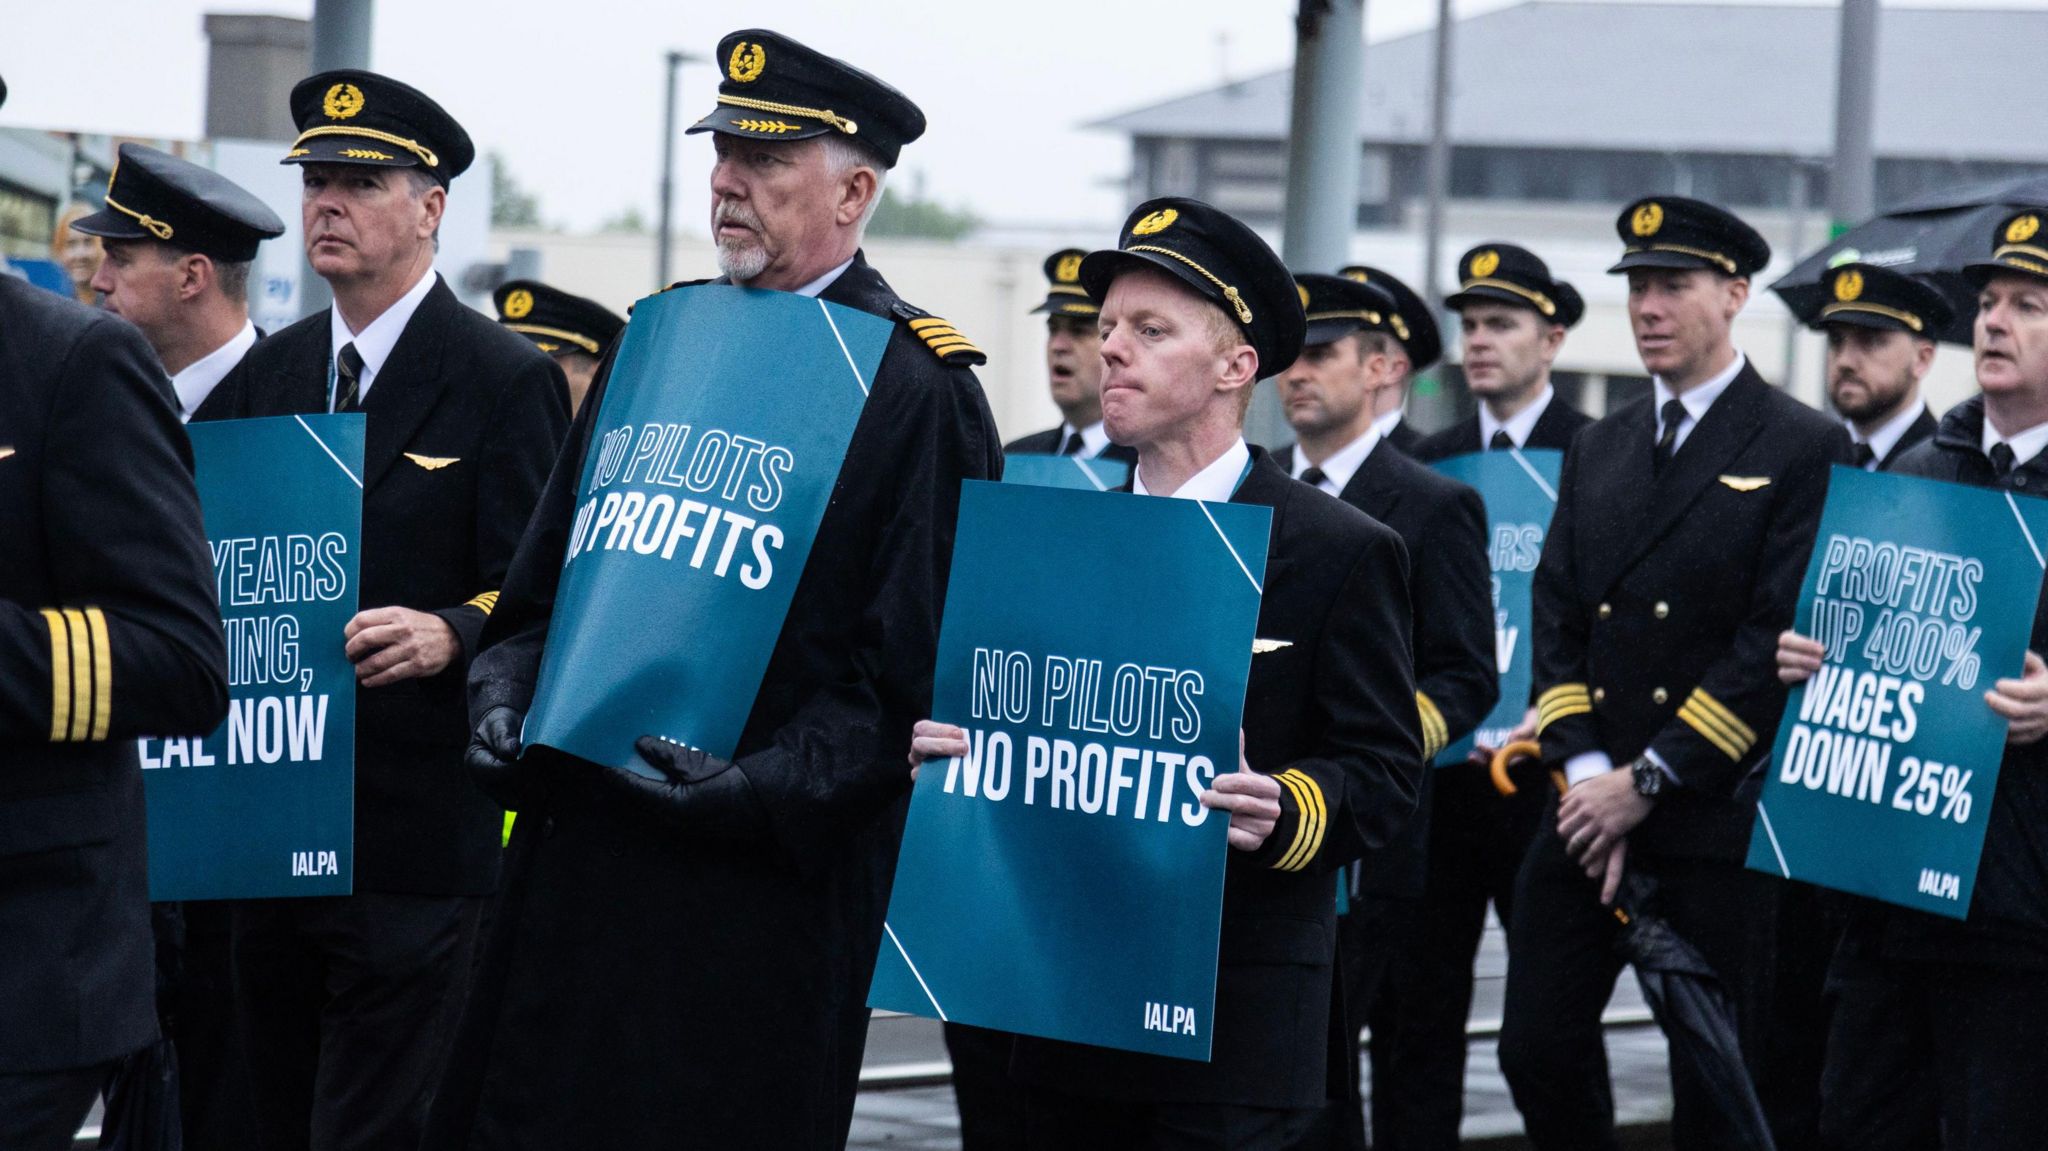 A number of striking Aer Lingus pilots standing outside Dublin airport holding placards